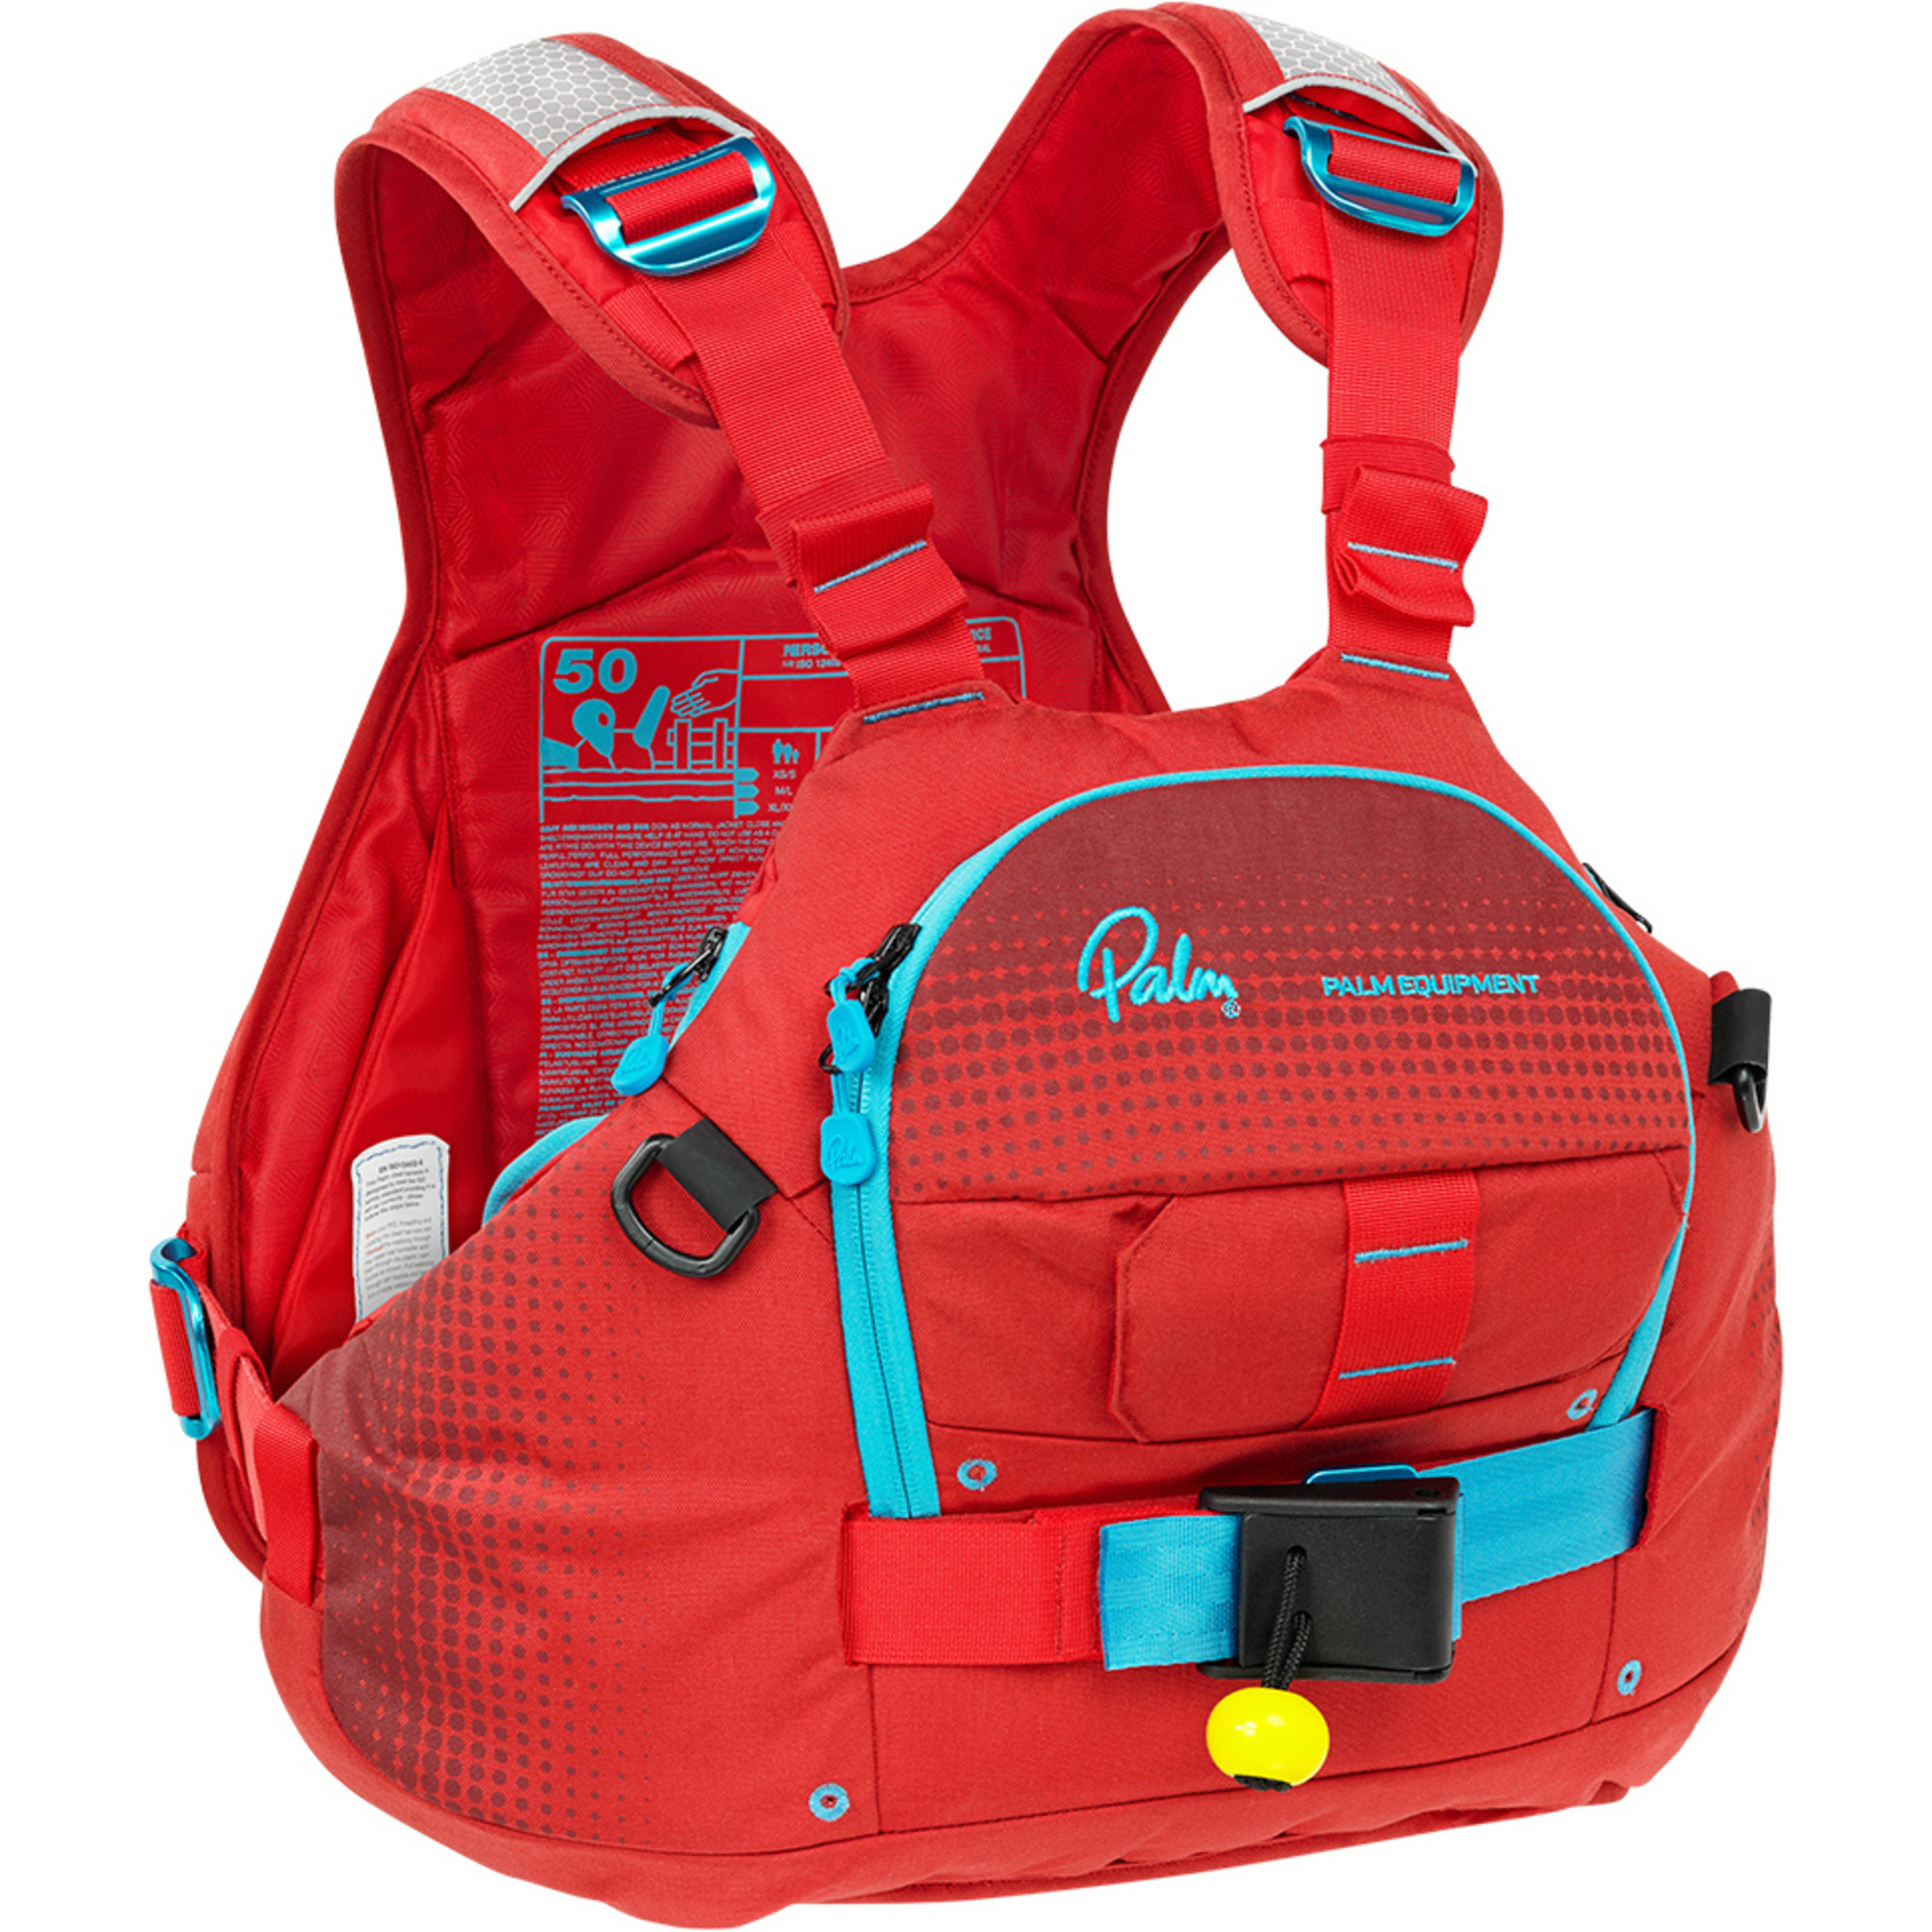 2022 Palm Nevis 70N Whitewater Buoyancy Aid 12132 - Flame / Chilli ...